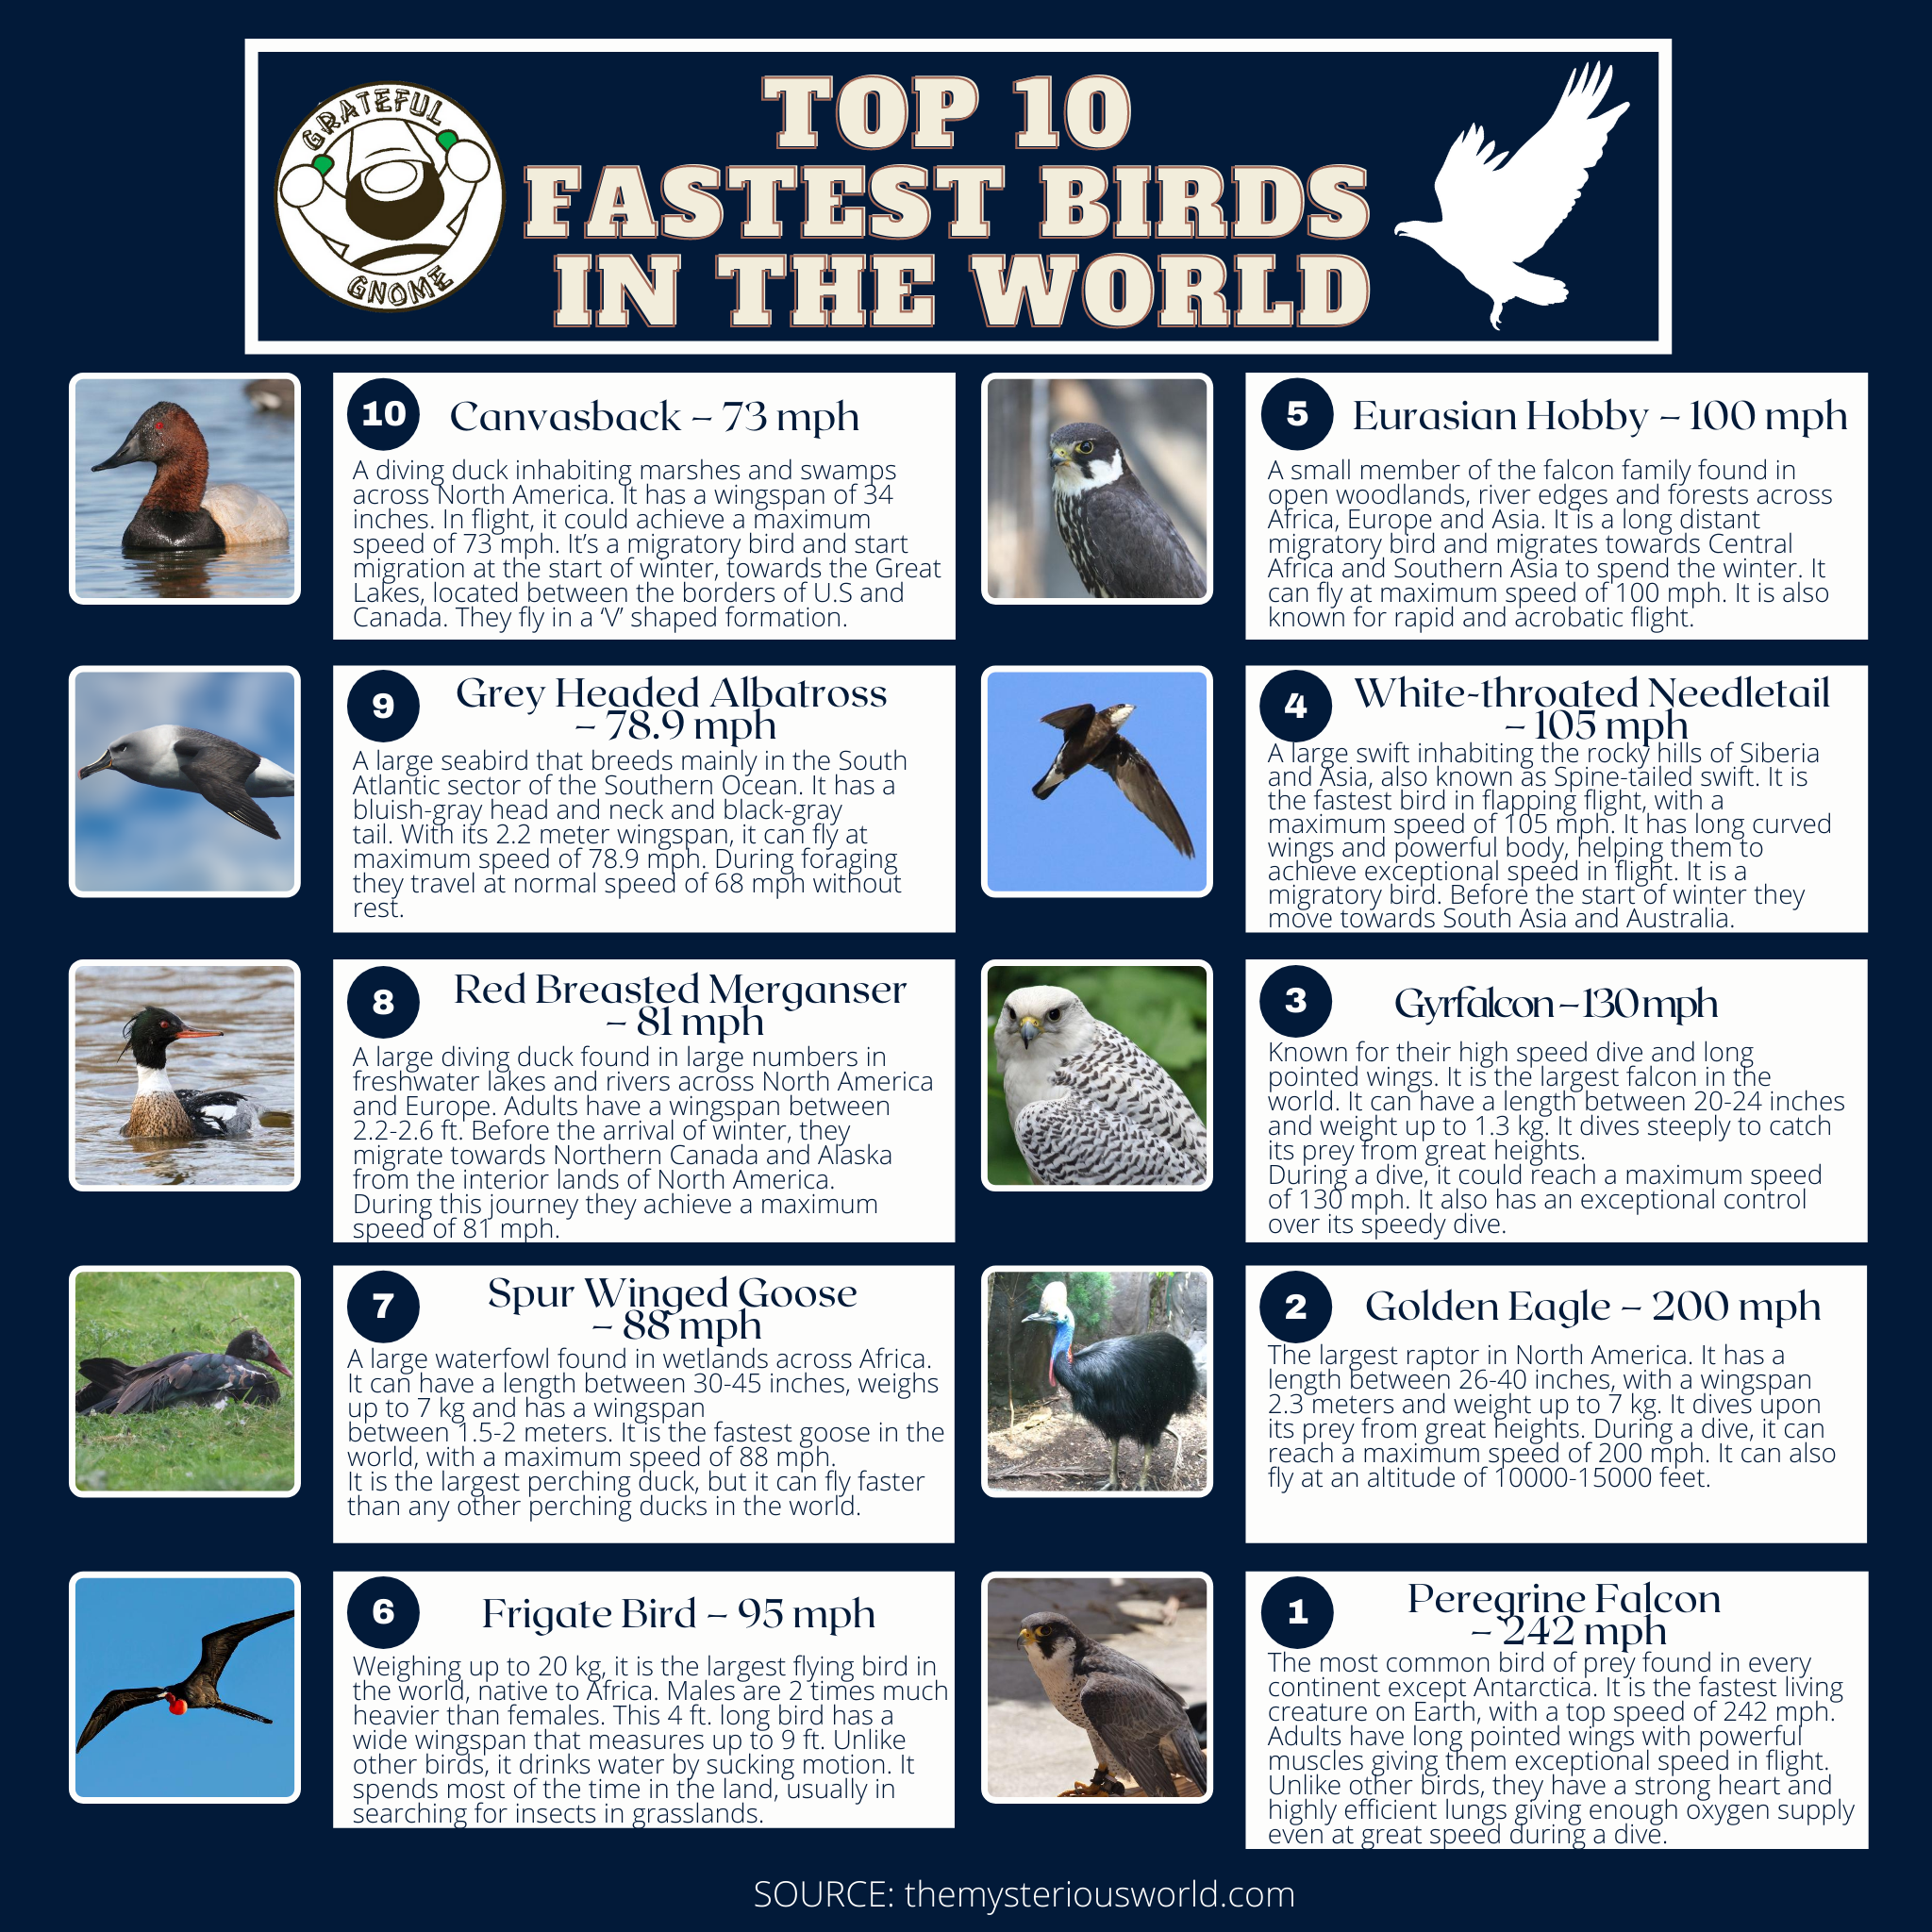 What is the fastest type of bird in the world?